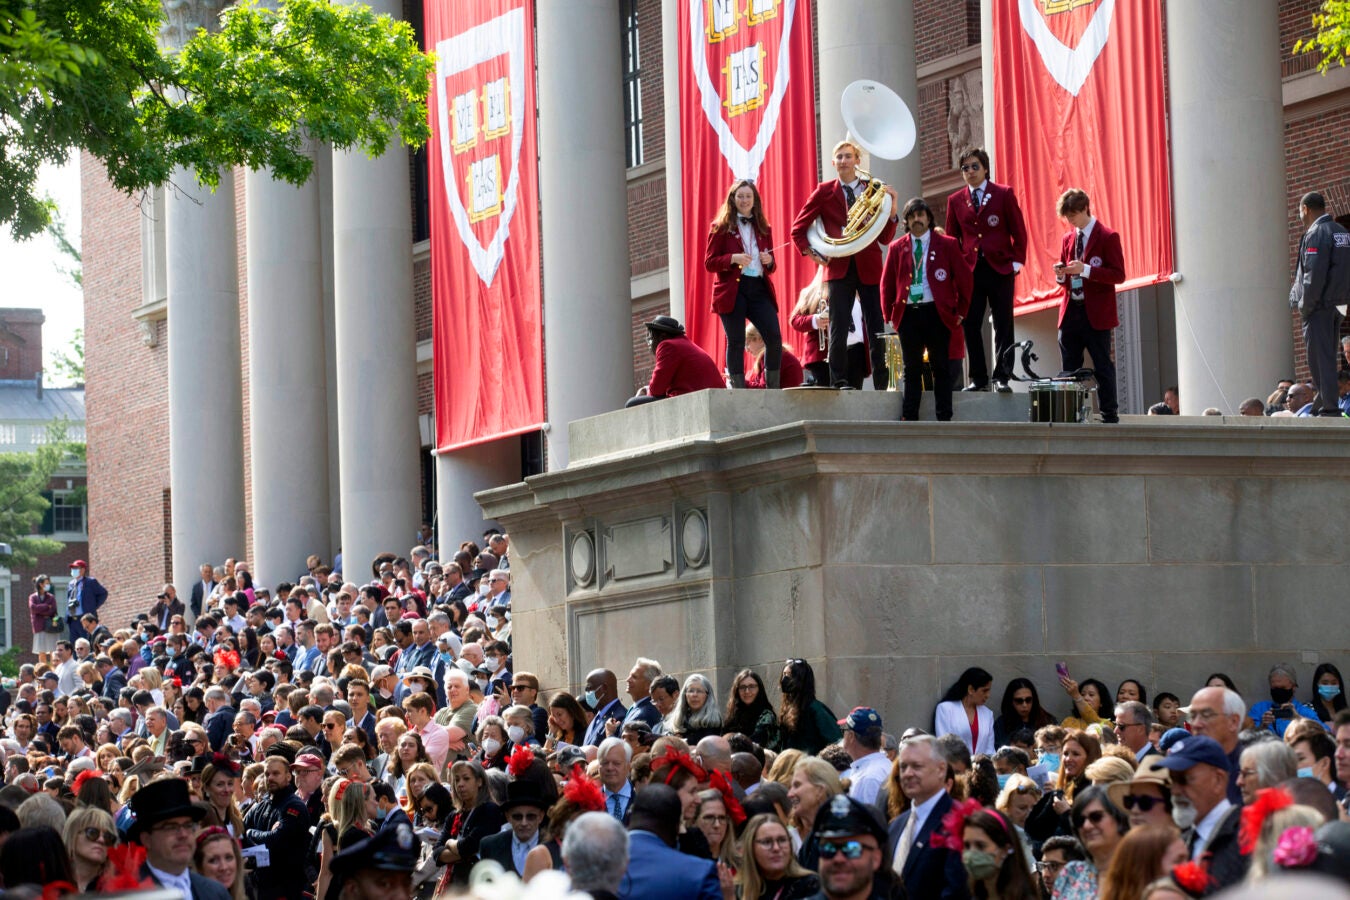 The Harvard Band gathers at Widener Library with a sea of family members below.